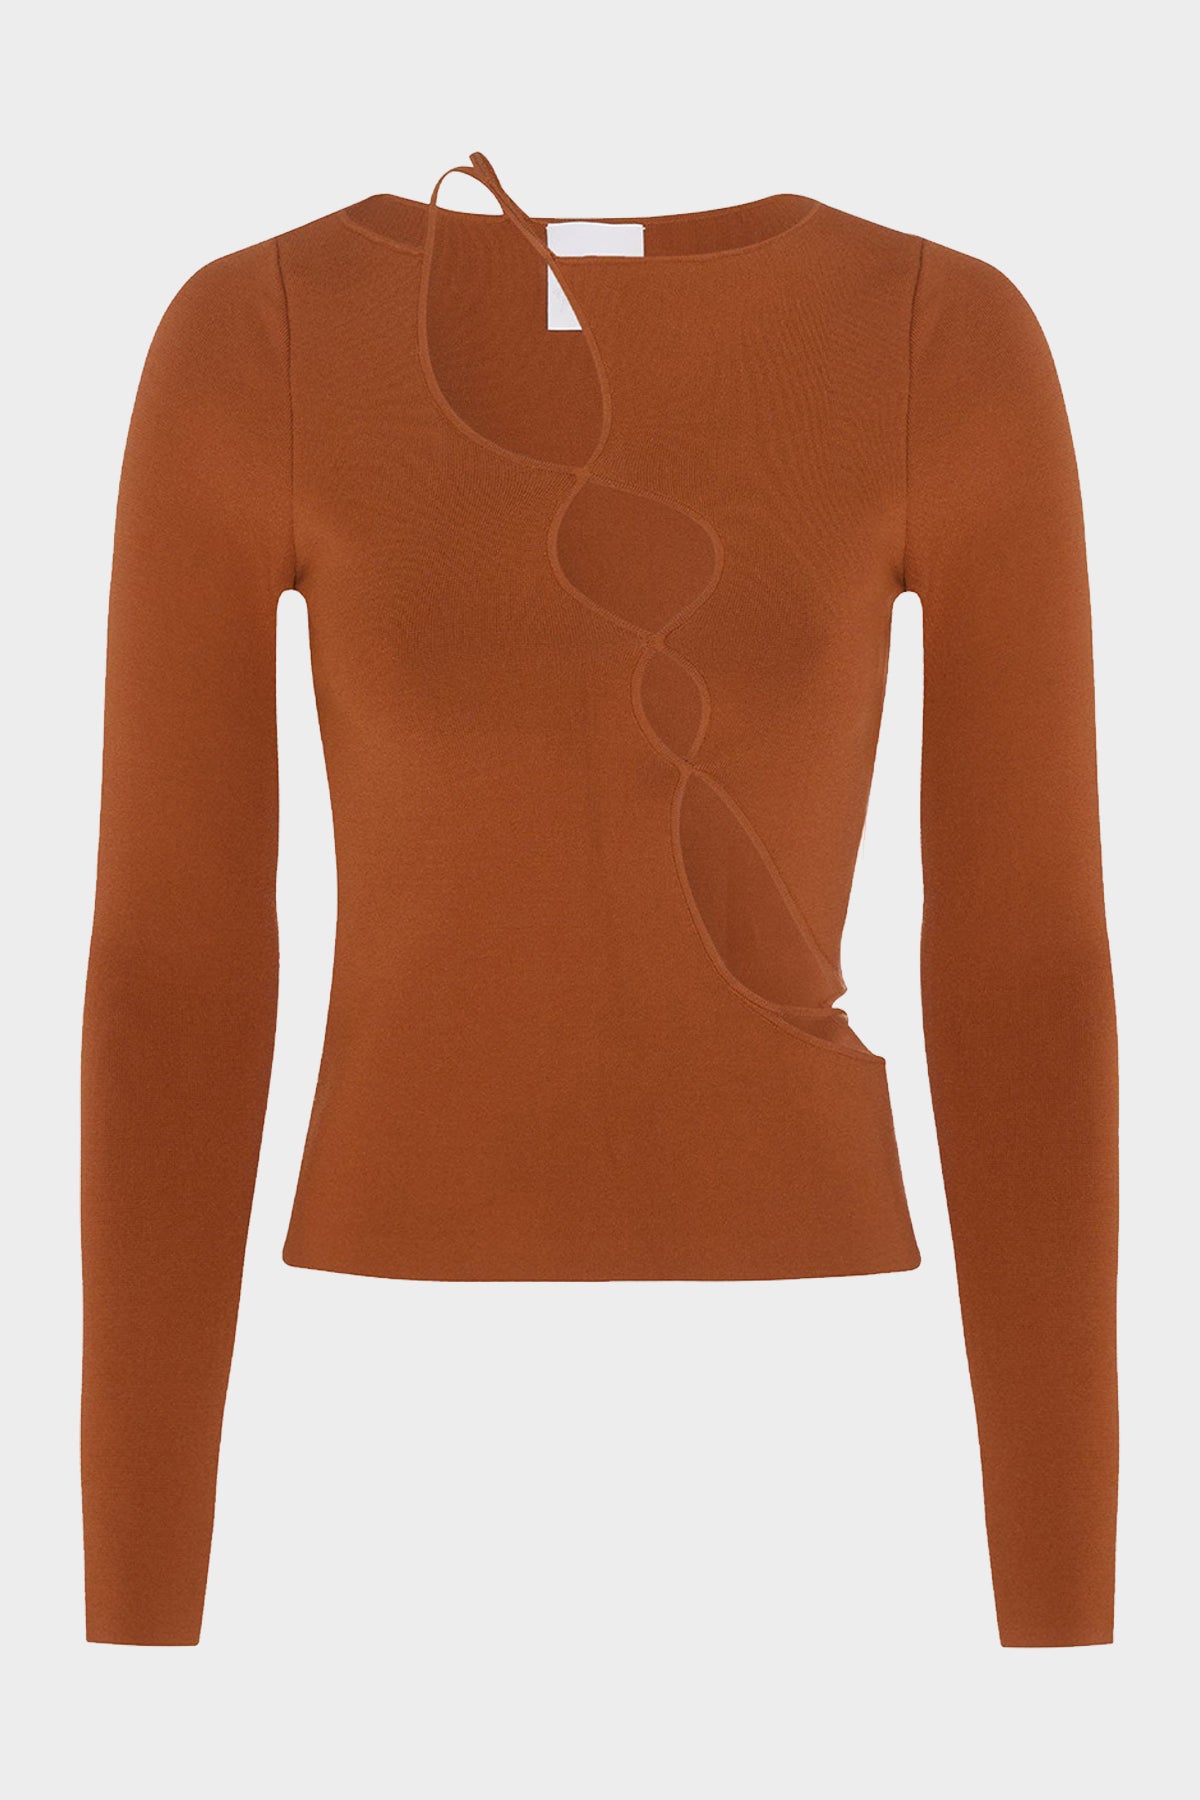 Squiggle Long Sleeve Top in Toffee - shop-olivia.com